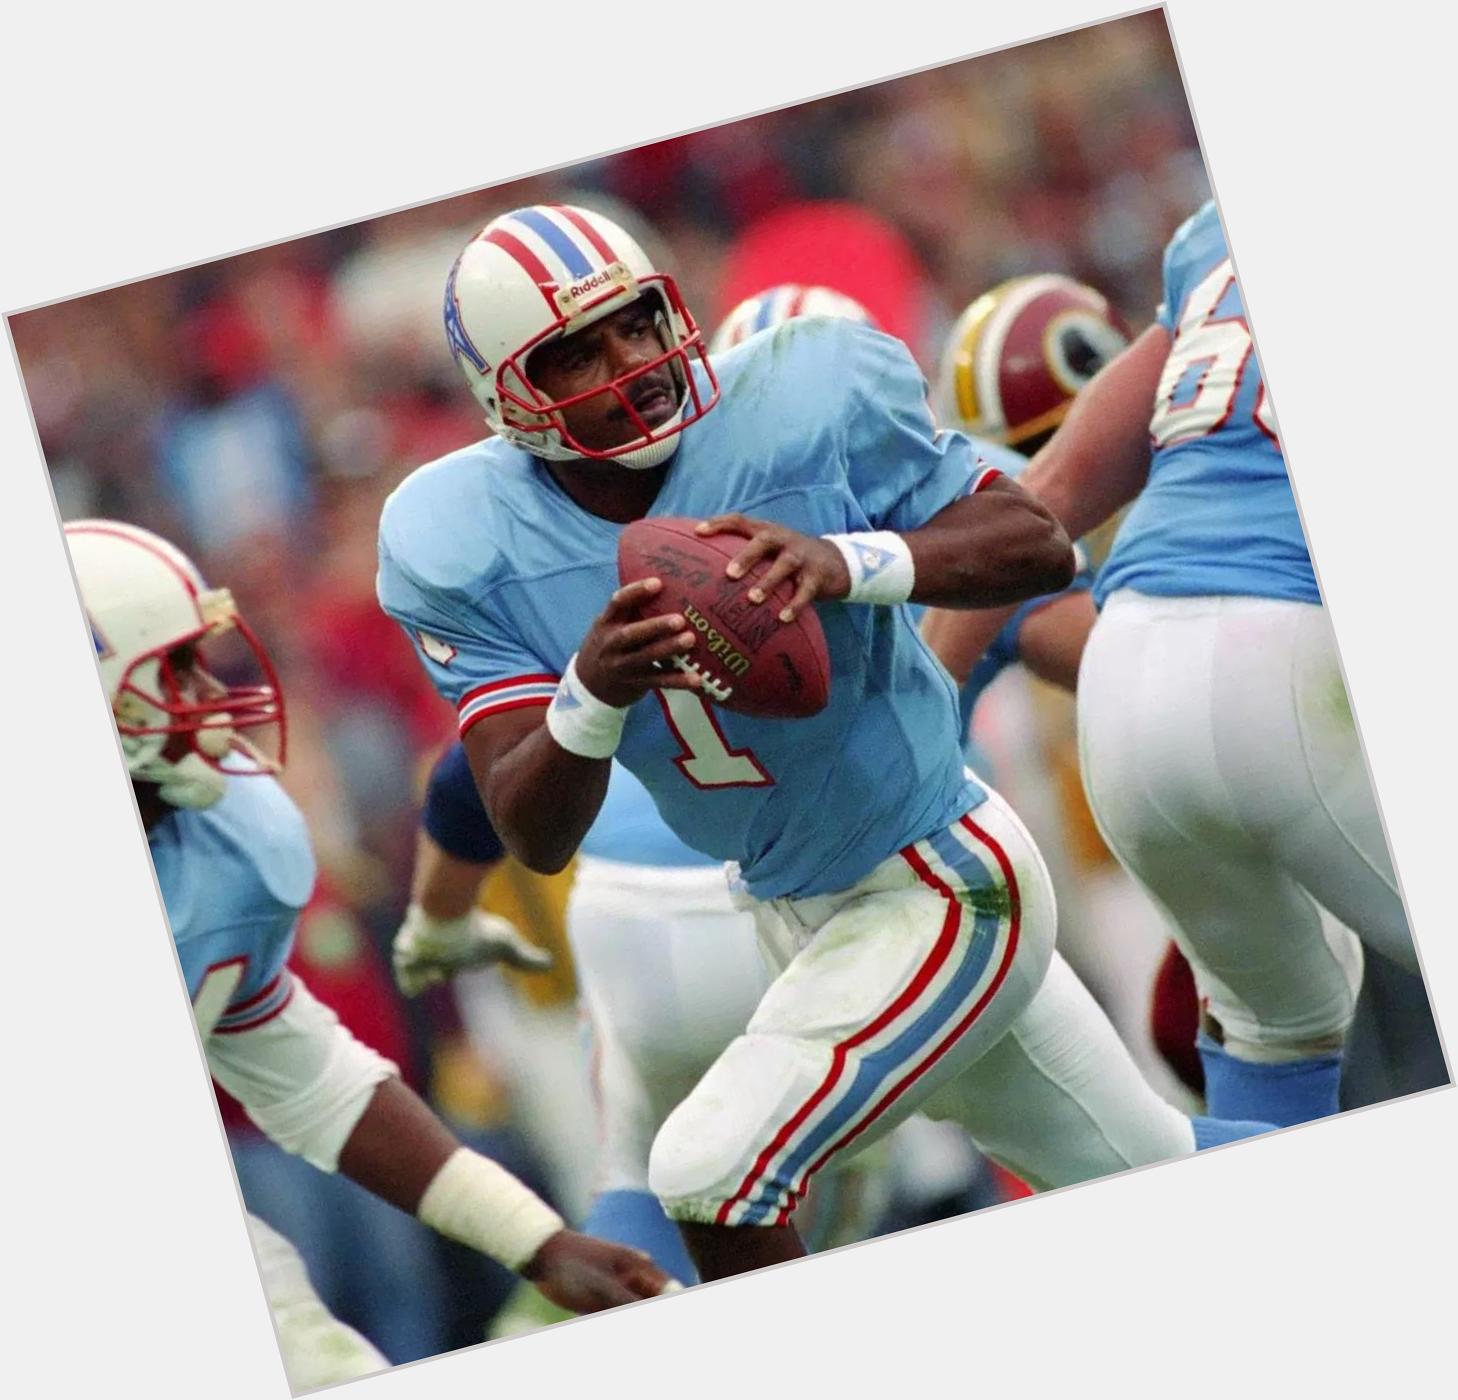 Happy BDay to lifetime member and Hall of Famer Warren Moon! 